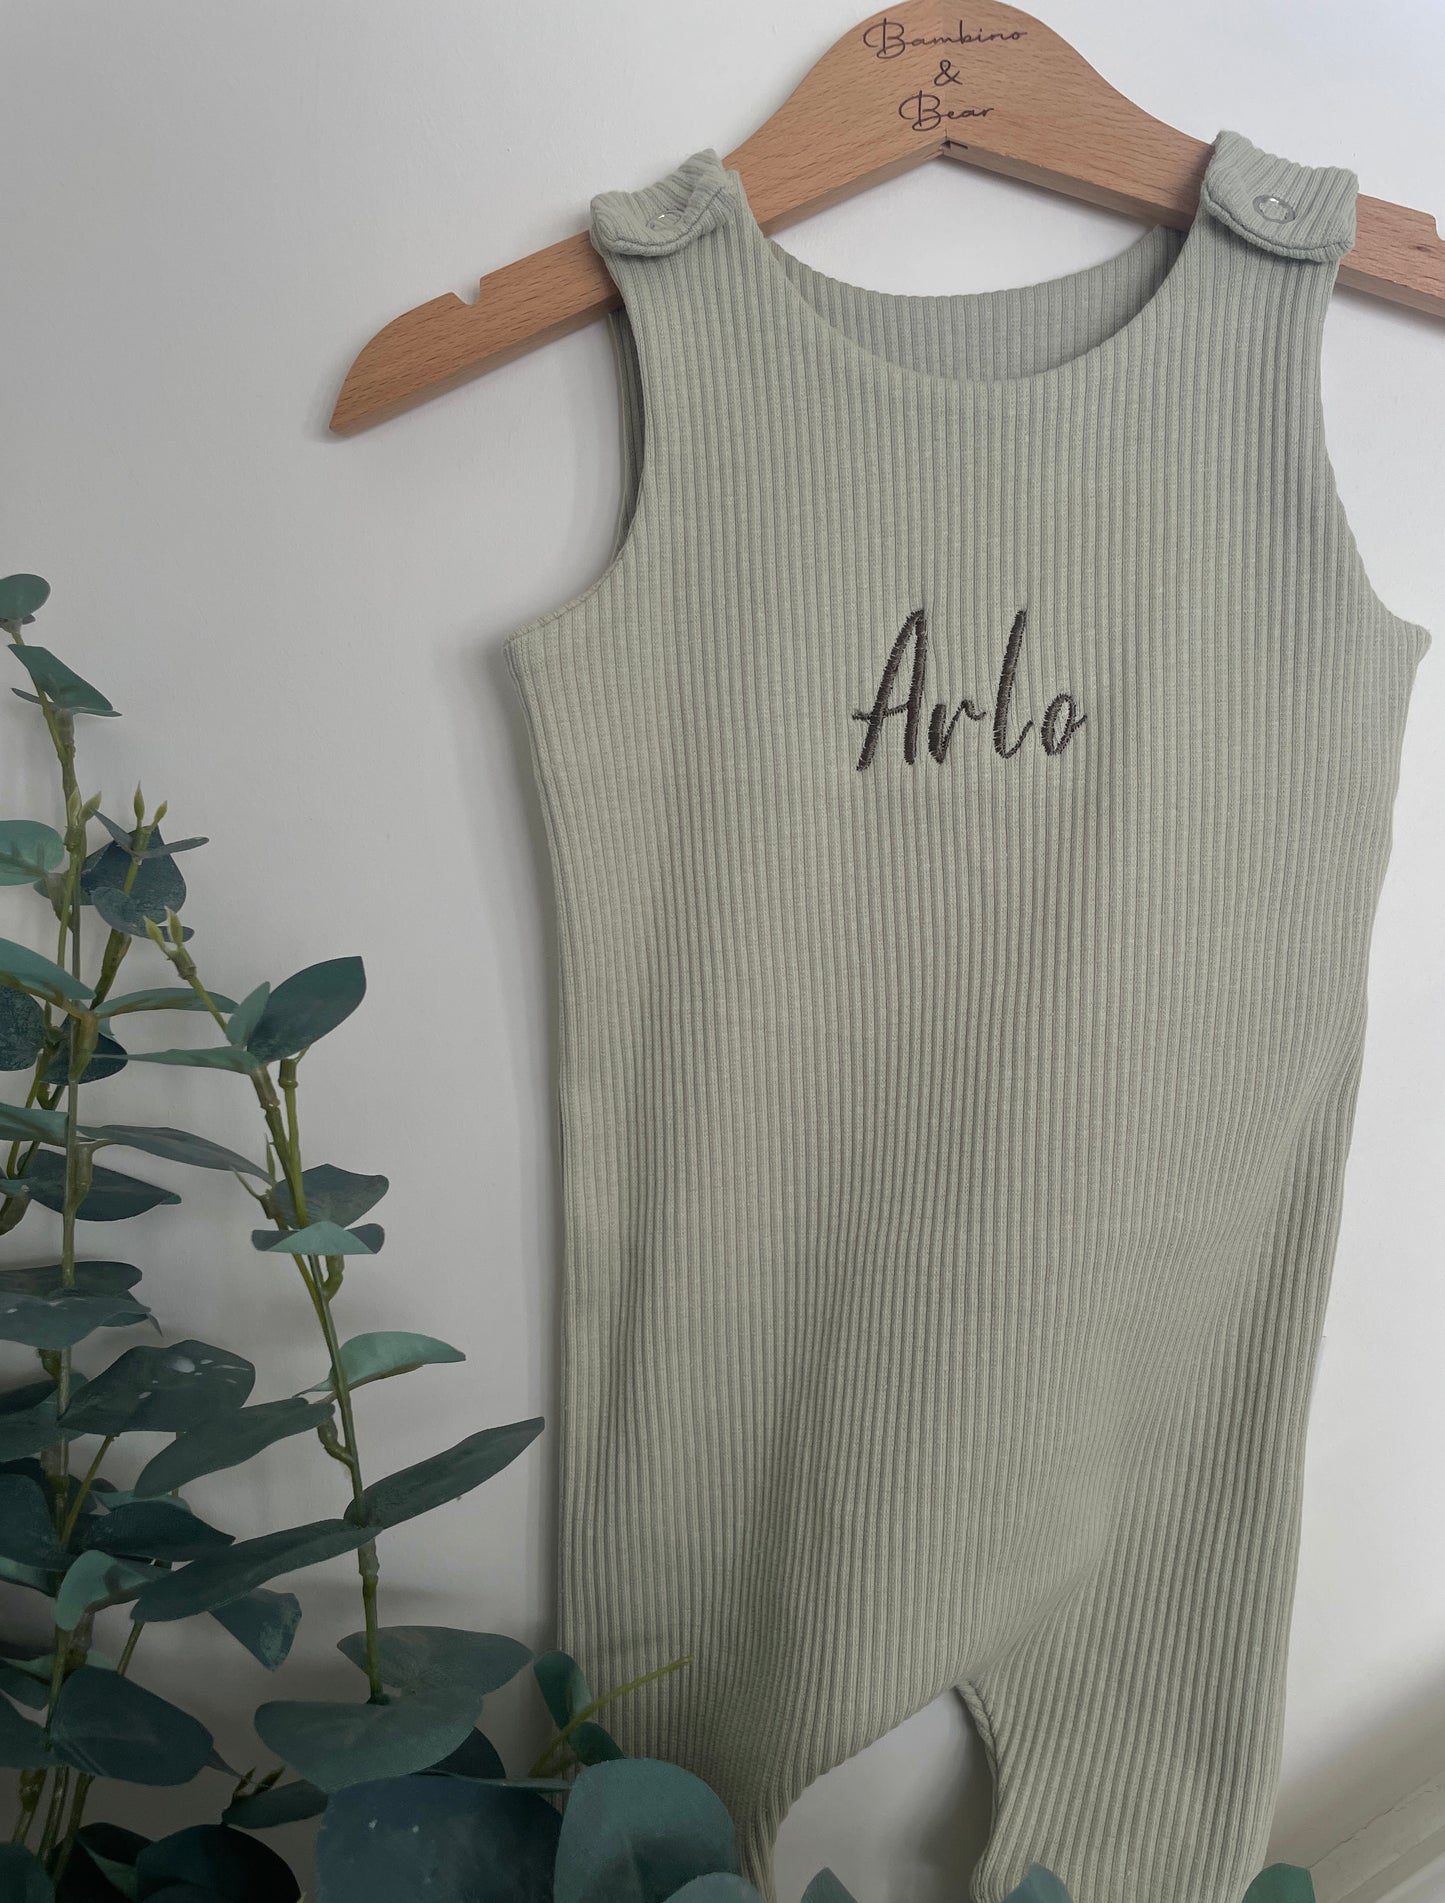 Personalised ribbed dungarees